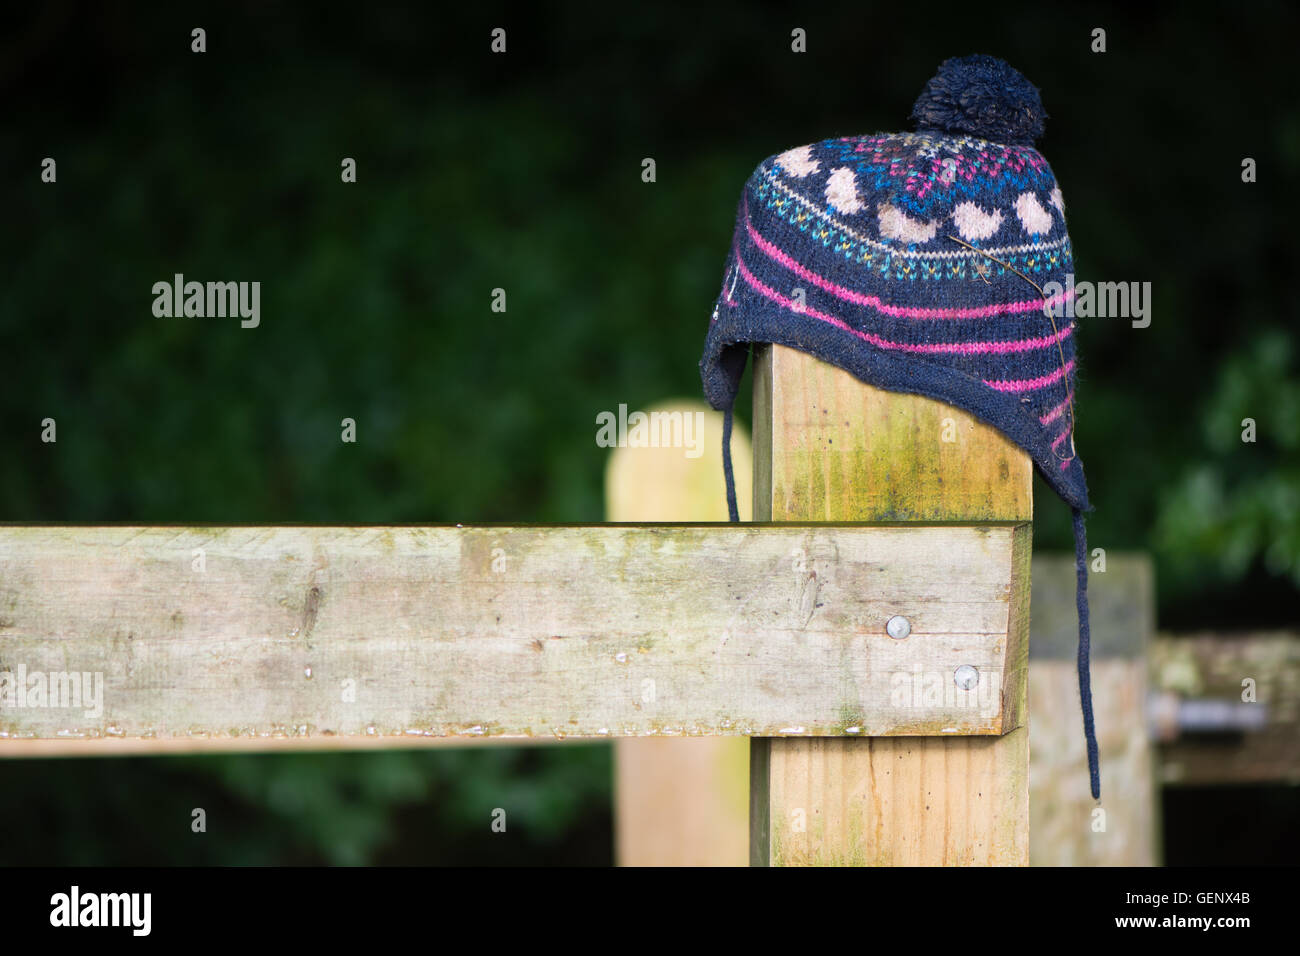 Lost hat on wooden fence post. Wooly child's hat mislaid in countryside placed on gate in hope of being seen by owner Stock Photo